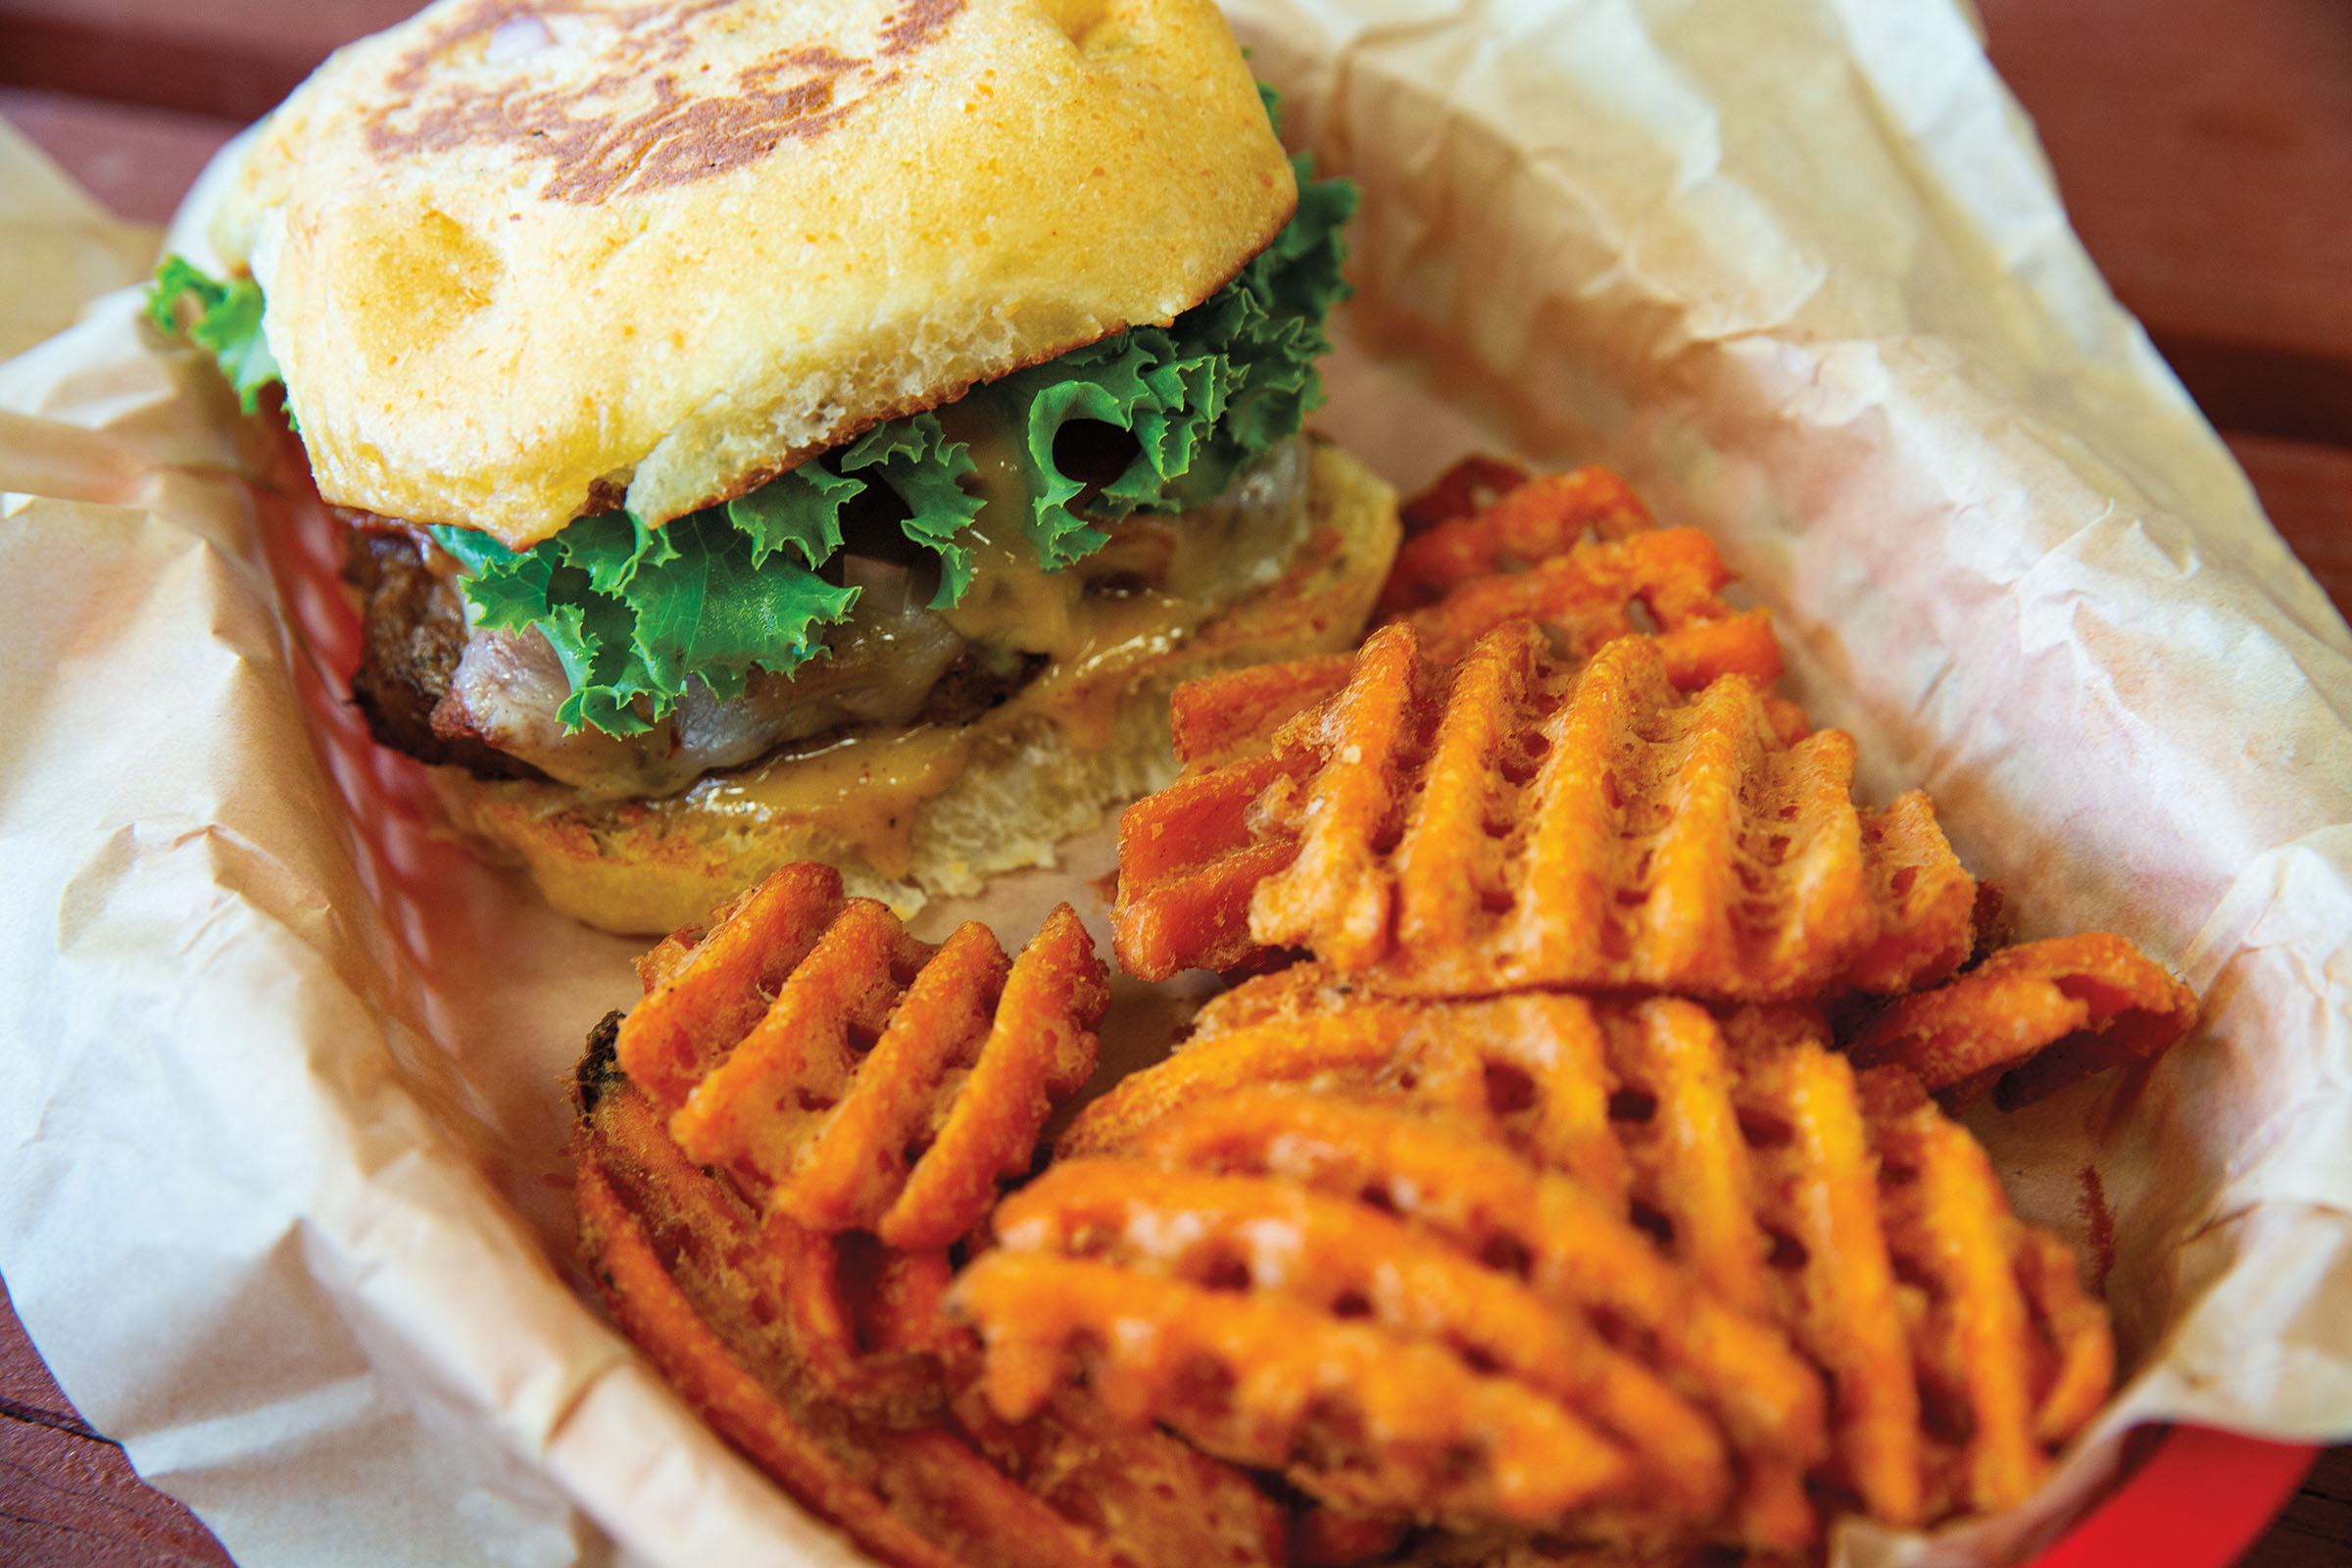 A basket of food containing waffle-cut sweet potato fries, a burger on a yellow bun with a large piece of lettuce and melting cheese